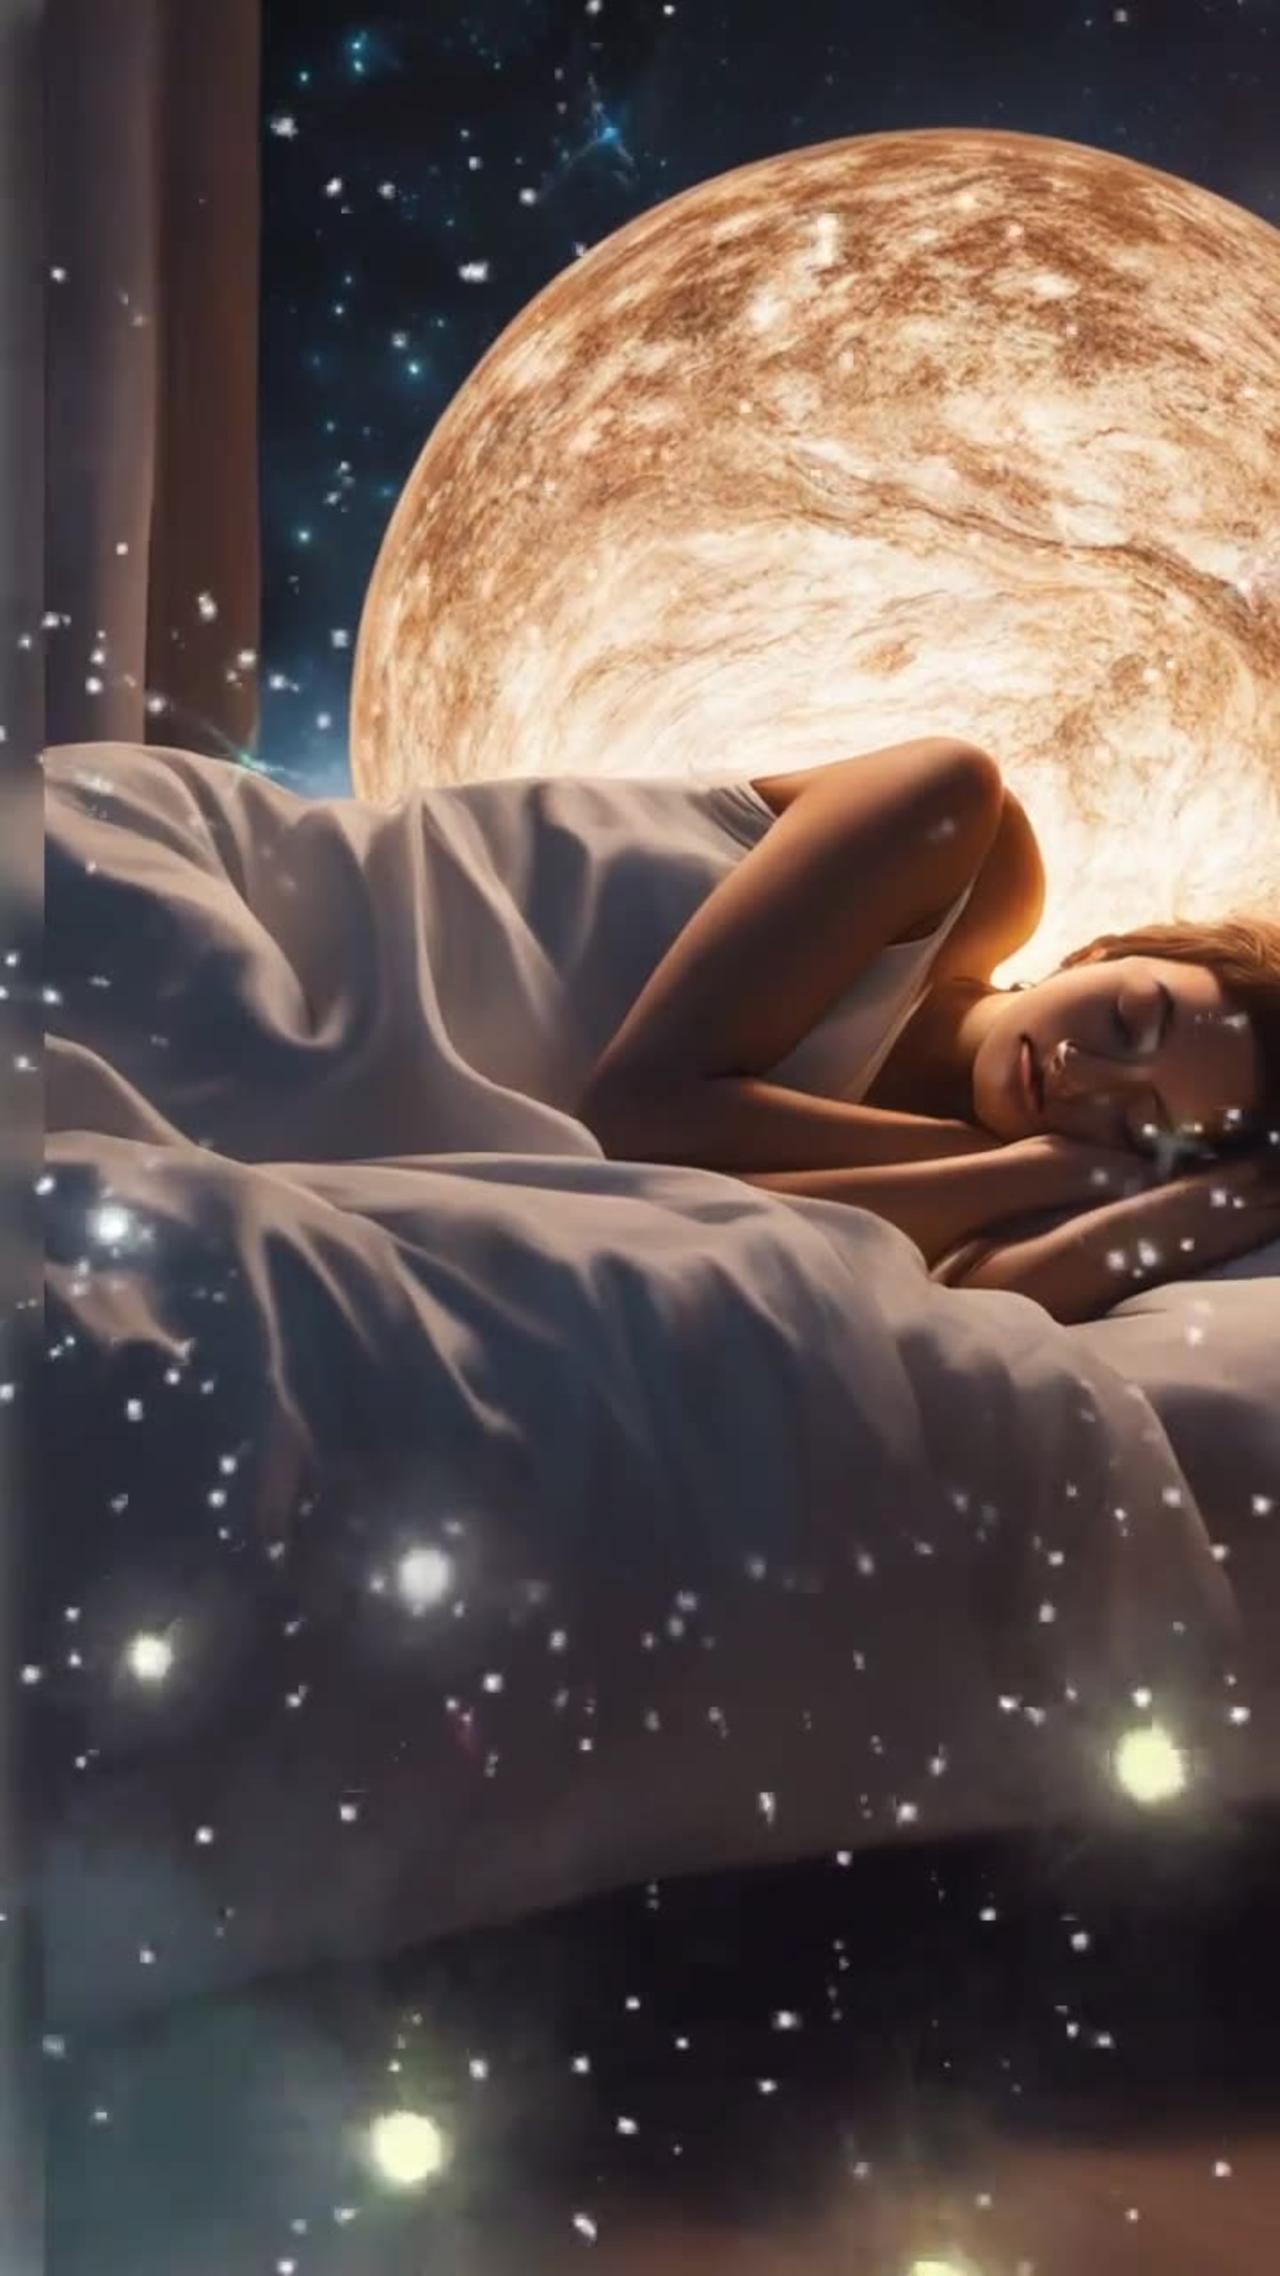 Creepy Facts About Dreams You Need to Know!